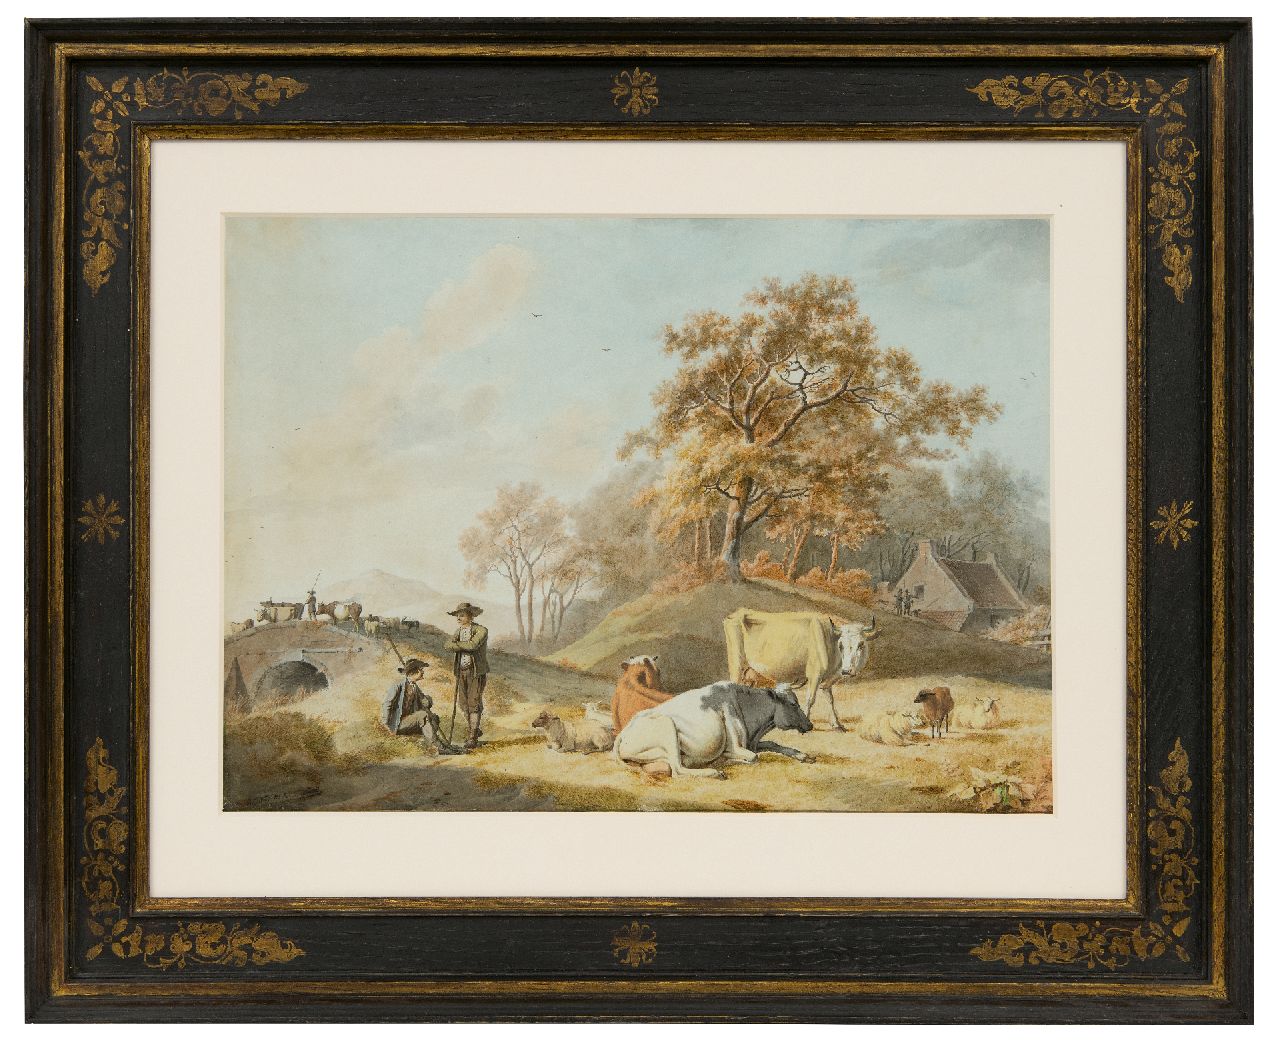 Koekkoek B.C.  | Barend Cornelis Koekkoek | Watercolours and drawings offered for sale | Arcadian landscape with shepherds and cattle, ink and watercolour on paper 26.7 x 37.5 cm, signed l.l. and ca 1824